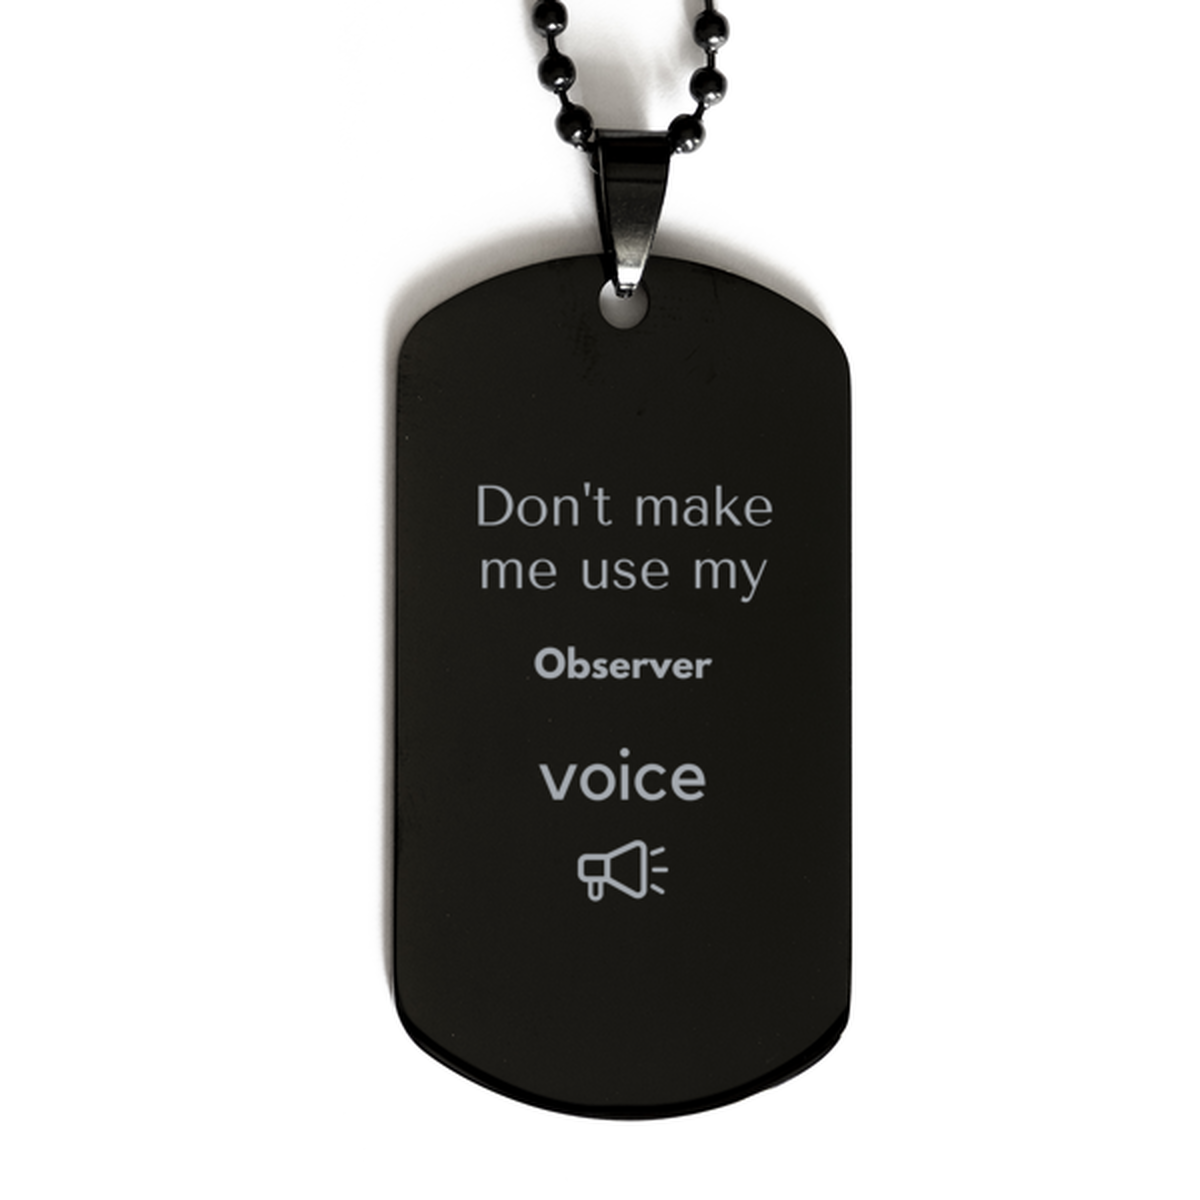 Don't make me use my Observer voice, Sarcasm Observer Gifts, Christmas Observer Black Dog Tag Birthday Unique Gifts For Observer Coworkers, Men, Women, Colleague, Friends